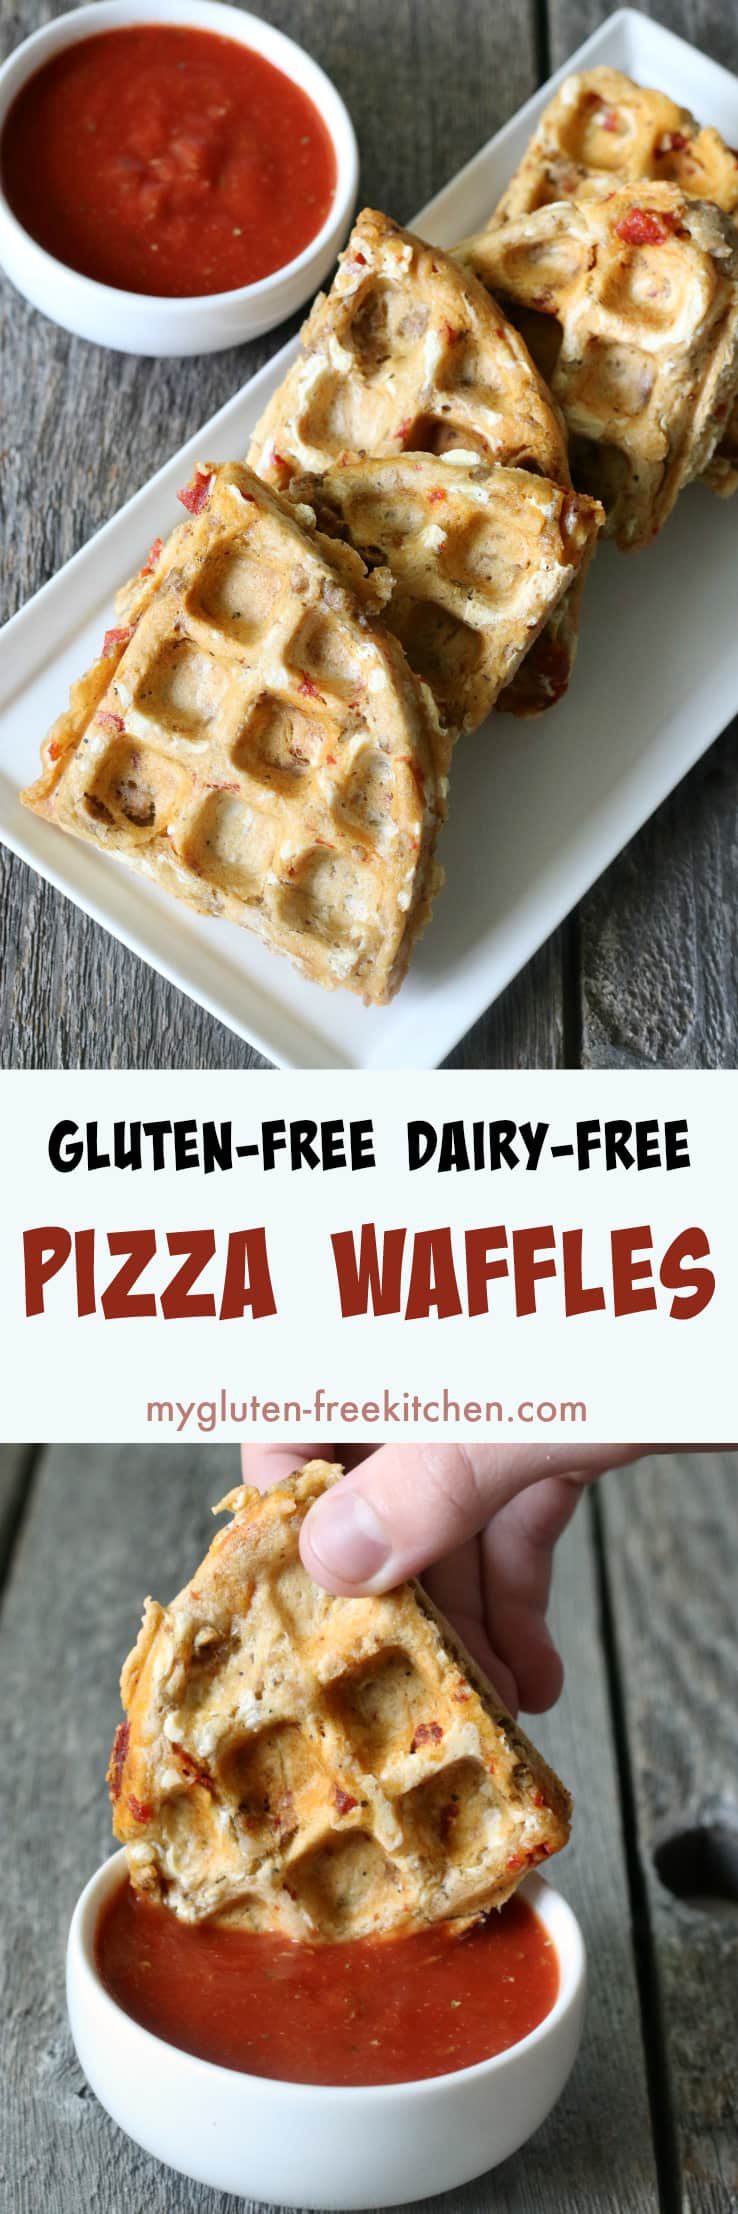 Gluten-free Dairy-free Pizza Waffles Recipe. Free of top 8 allergens too! Fun lunch idea!